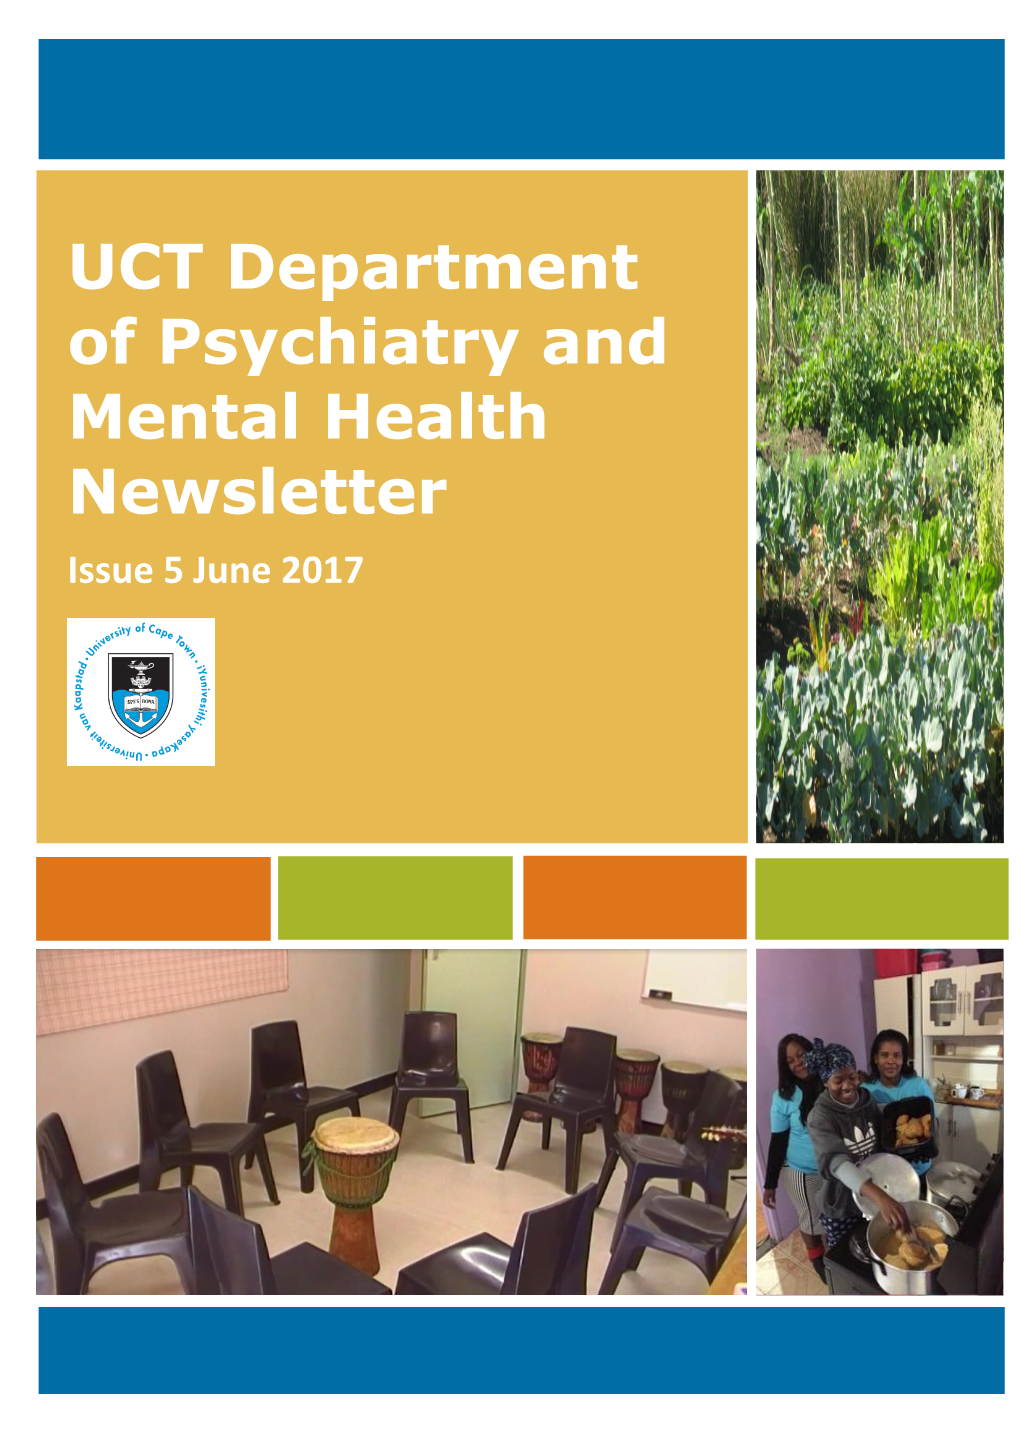 UCT Department of Psychiatry and Mental Health Newsletter